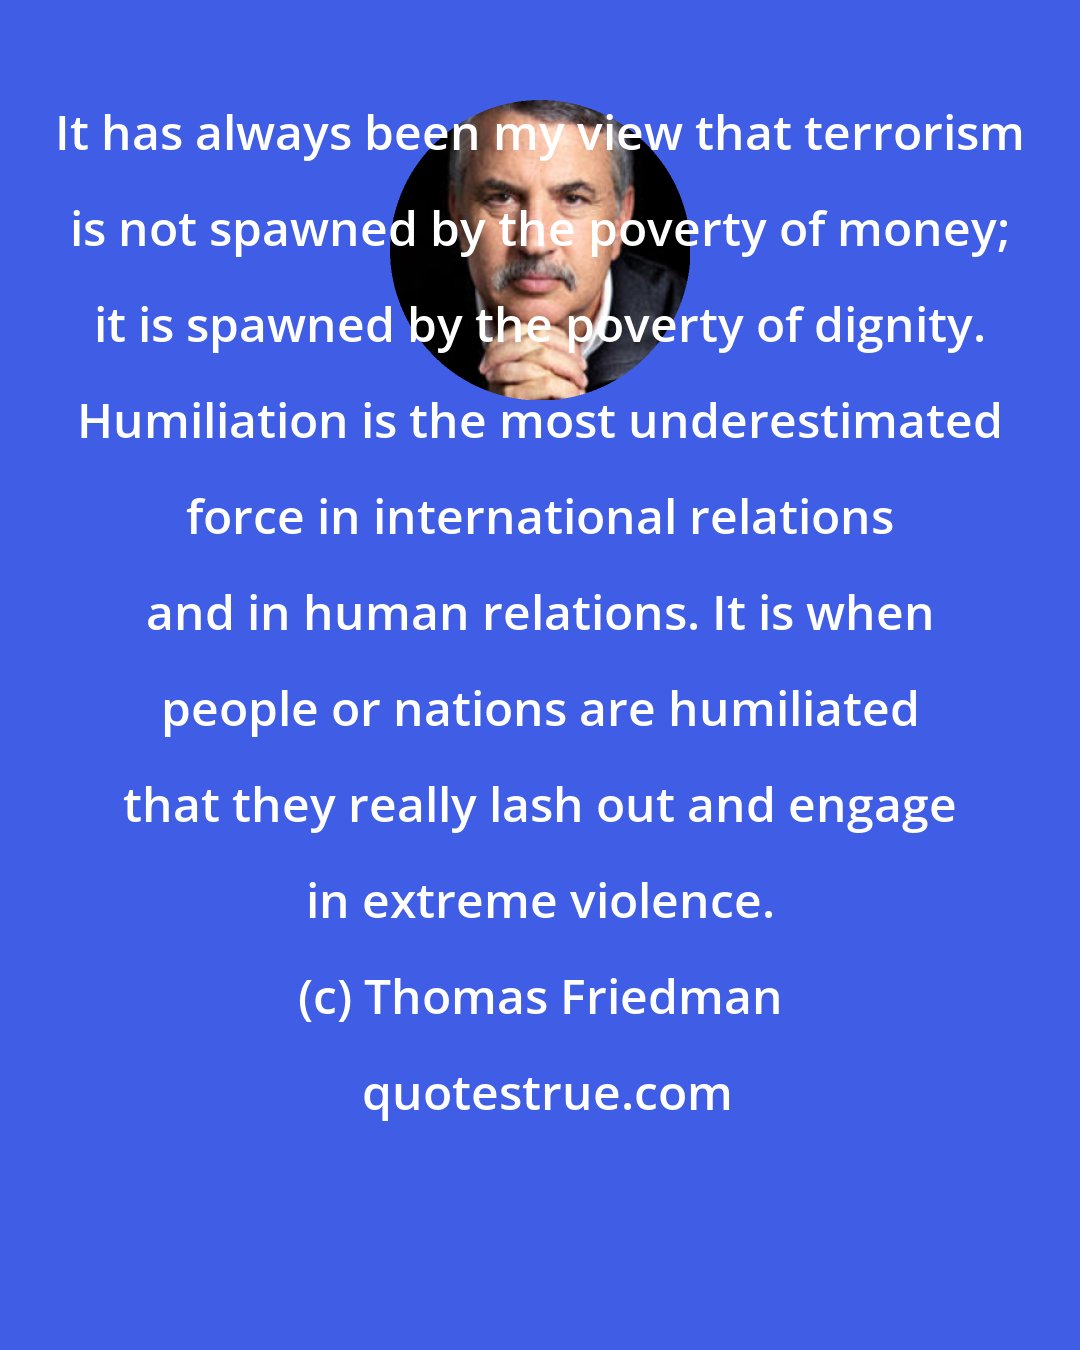 Thomas Friedman: It has always been my view that terrorism is not spawned by the poverty of money; it is spawned by the poverty of dignity. Humiliation is the most underestimated force in international relations and in human relations. It is when people or nations are humiliated that they really lash out and engage in extreme violence.